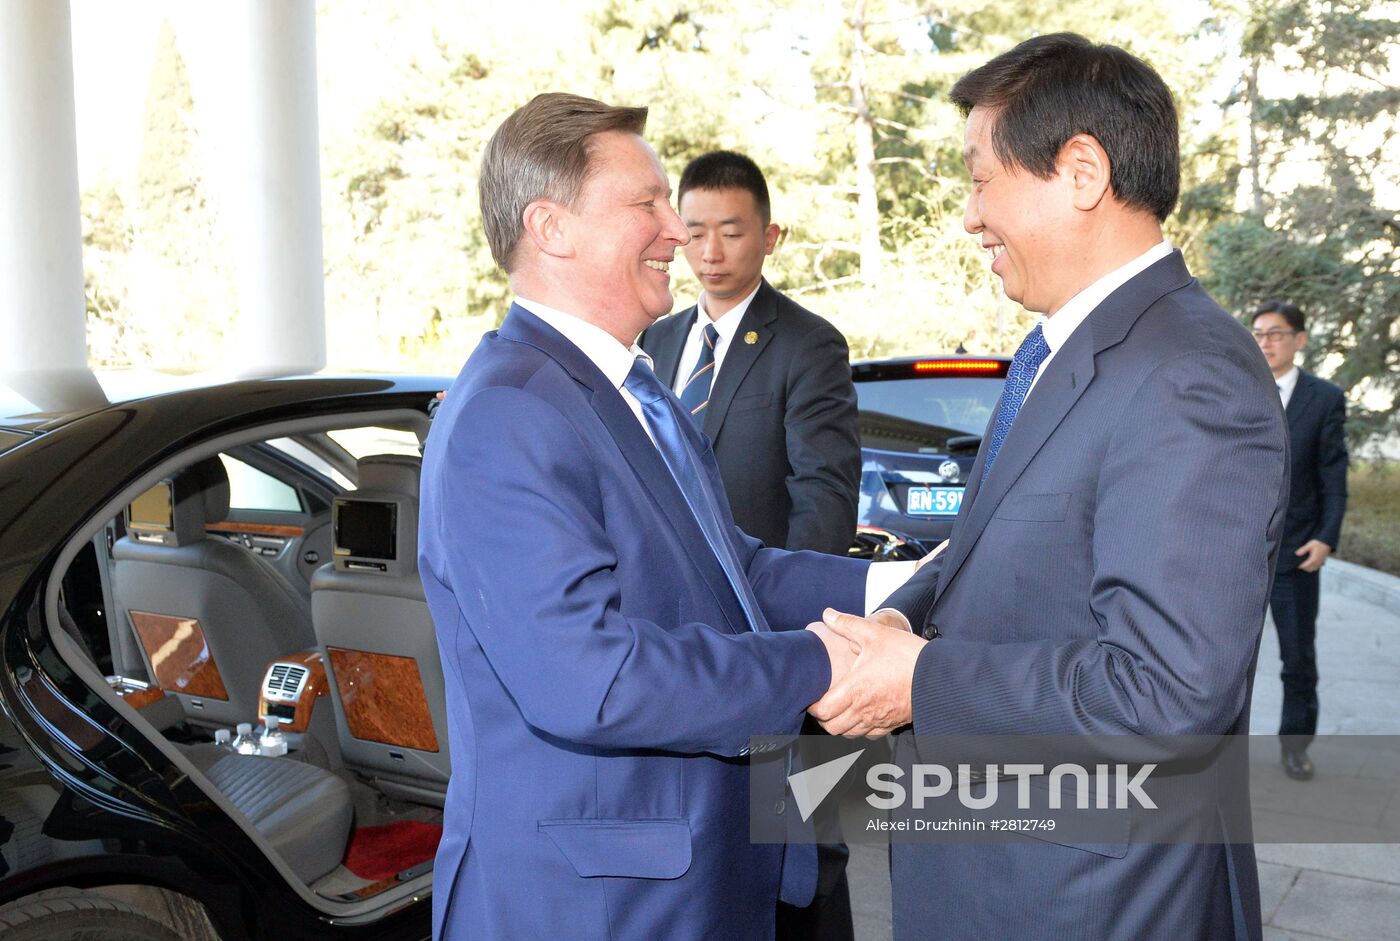 Chief of Staff of the Russian Presidential Executive Office Sergei Ivanov visits China